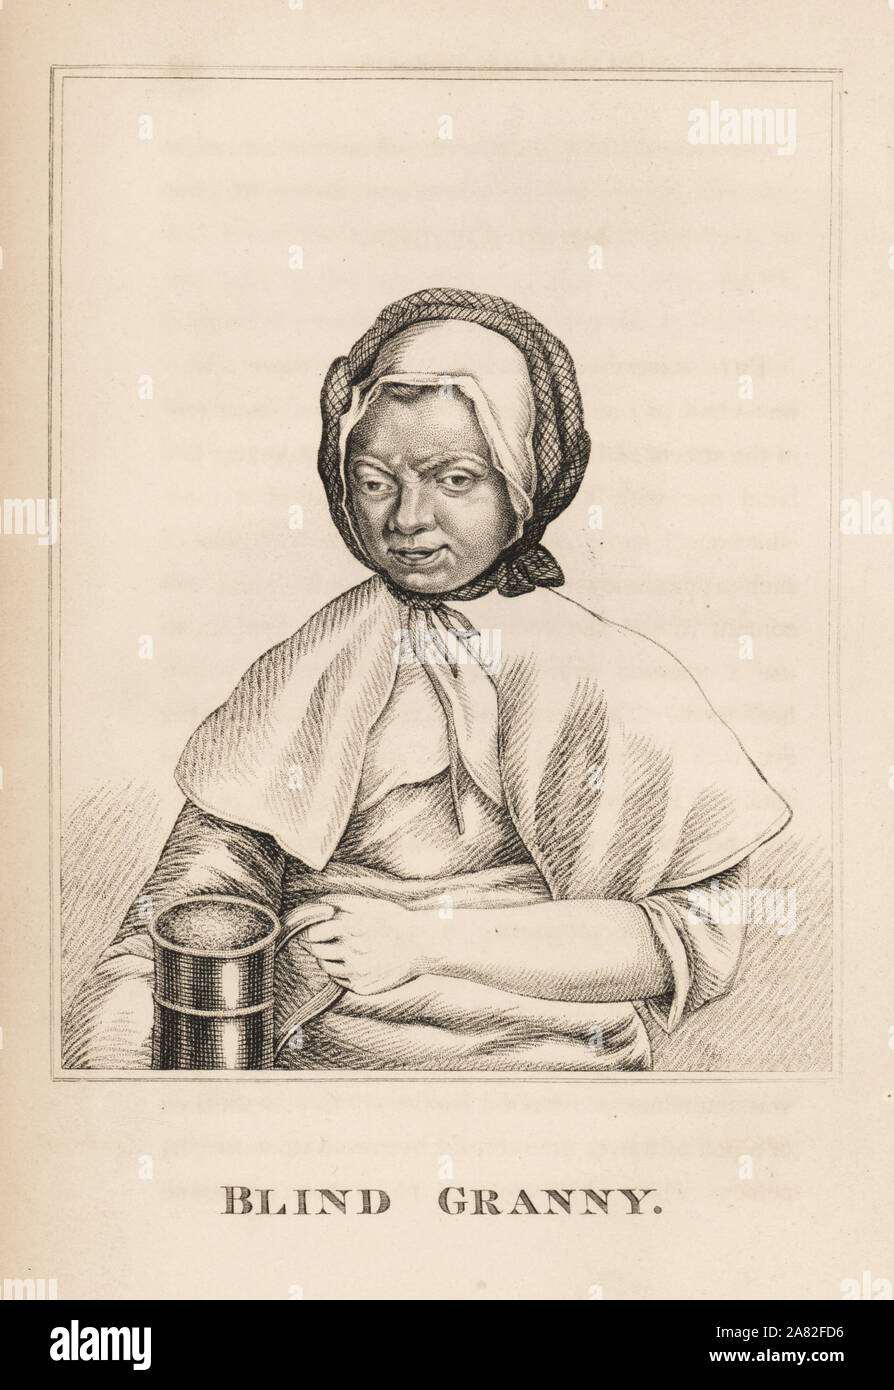 Blind Granny, drunk London beggar who could lick her blind eye with her tongue. Engraving from James Caulfield's Portraits, Memoirs and Characters of Remarkable Persons, London, 1819. Stock Photo